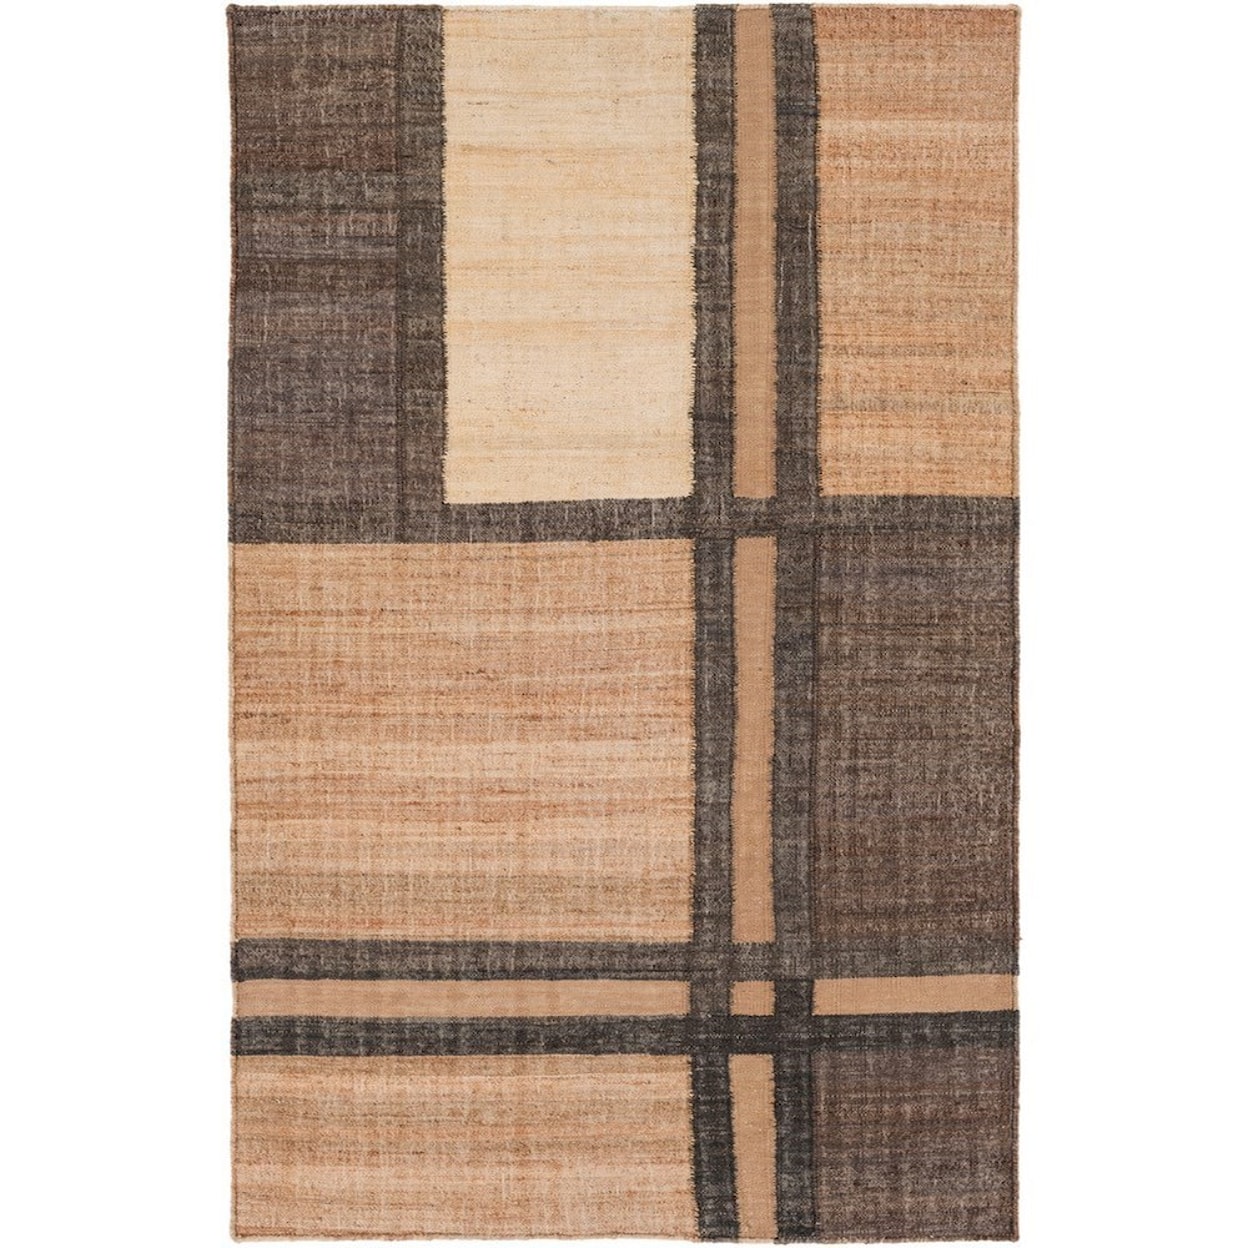 Ruby-Gordon Accents Seaport1 2' x 3' Rug